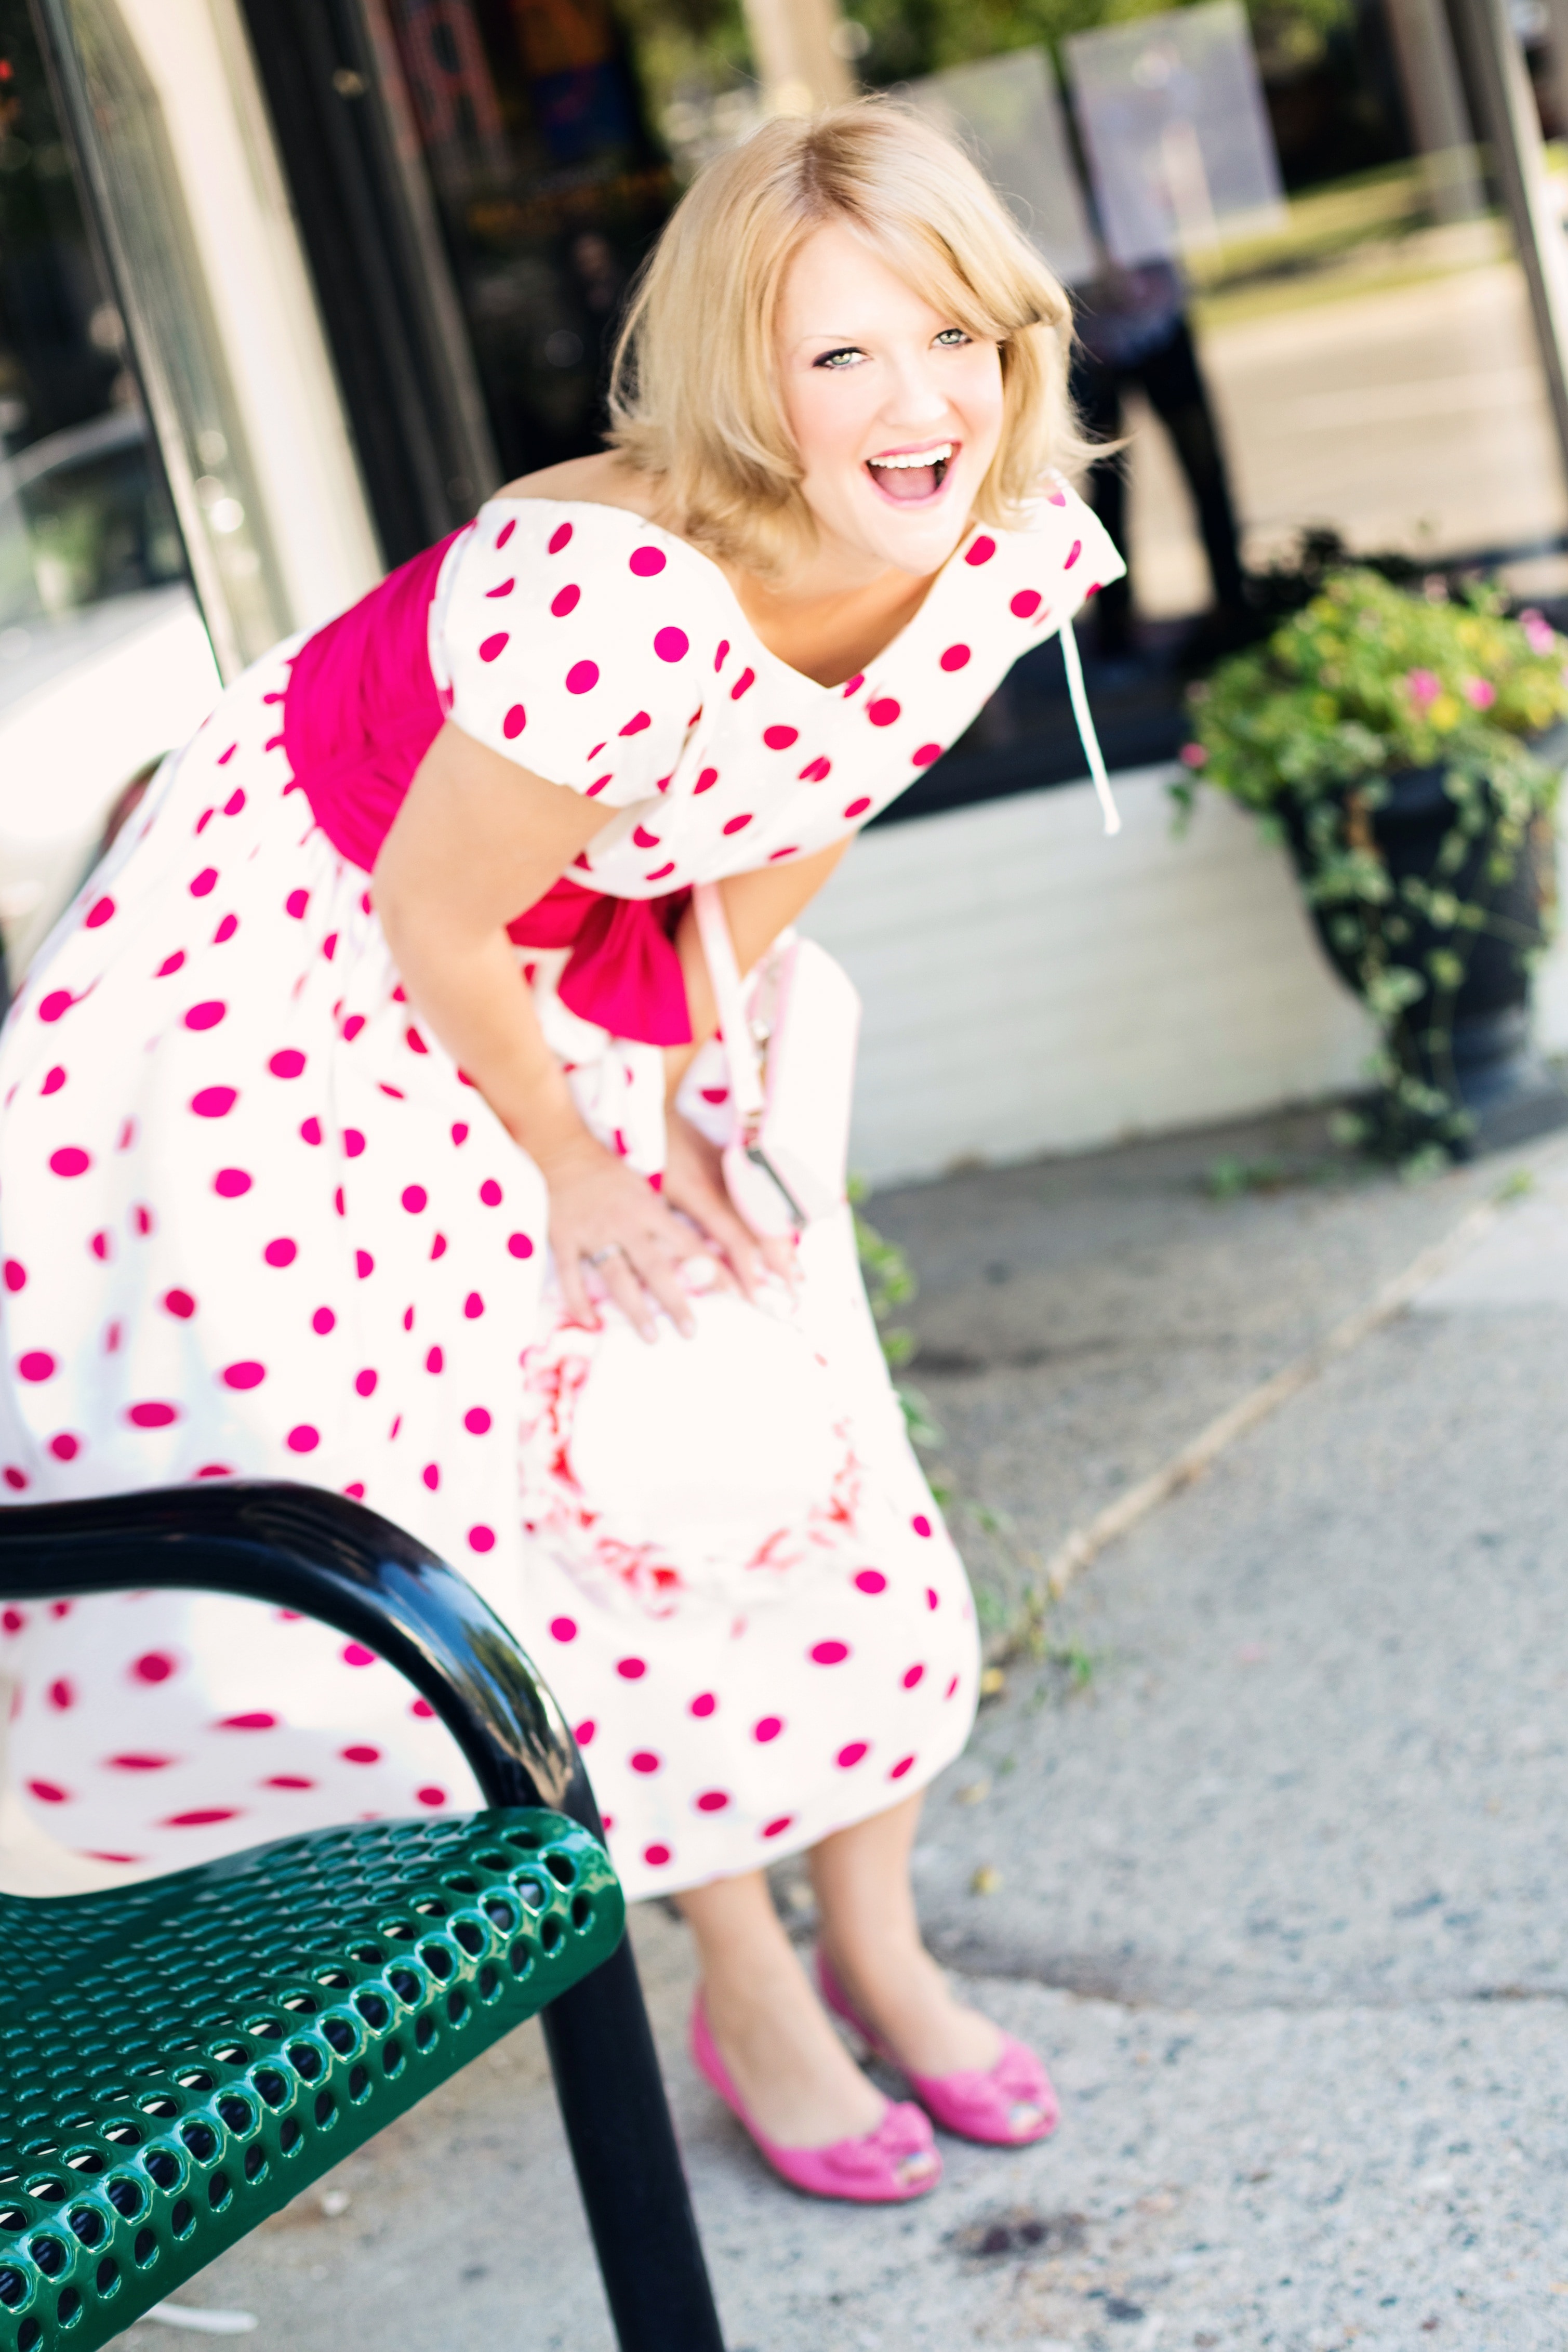 women's pink and white polka dot dress and pink patent leather pumps